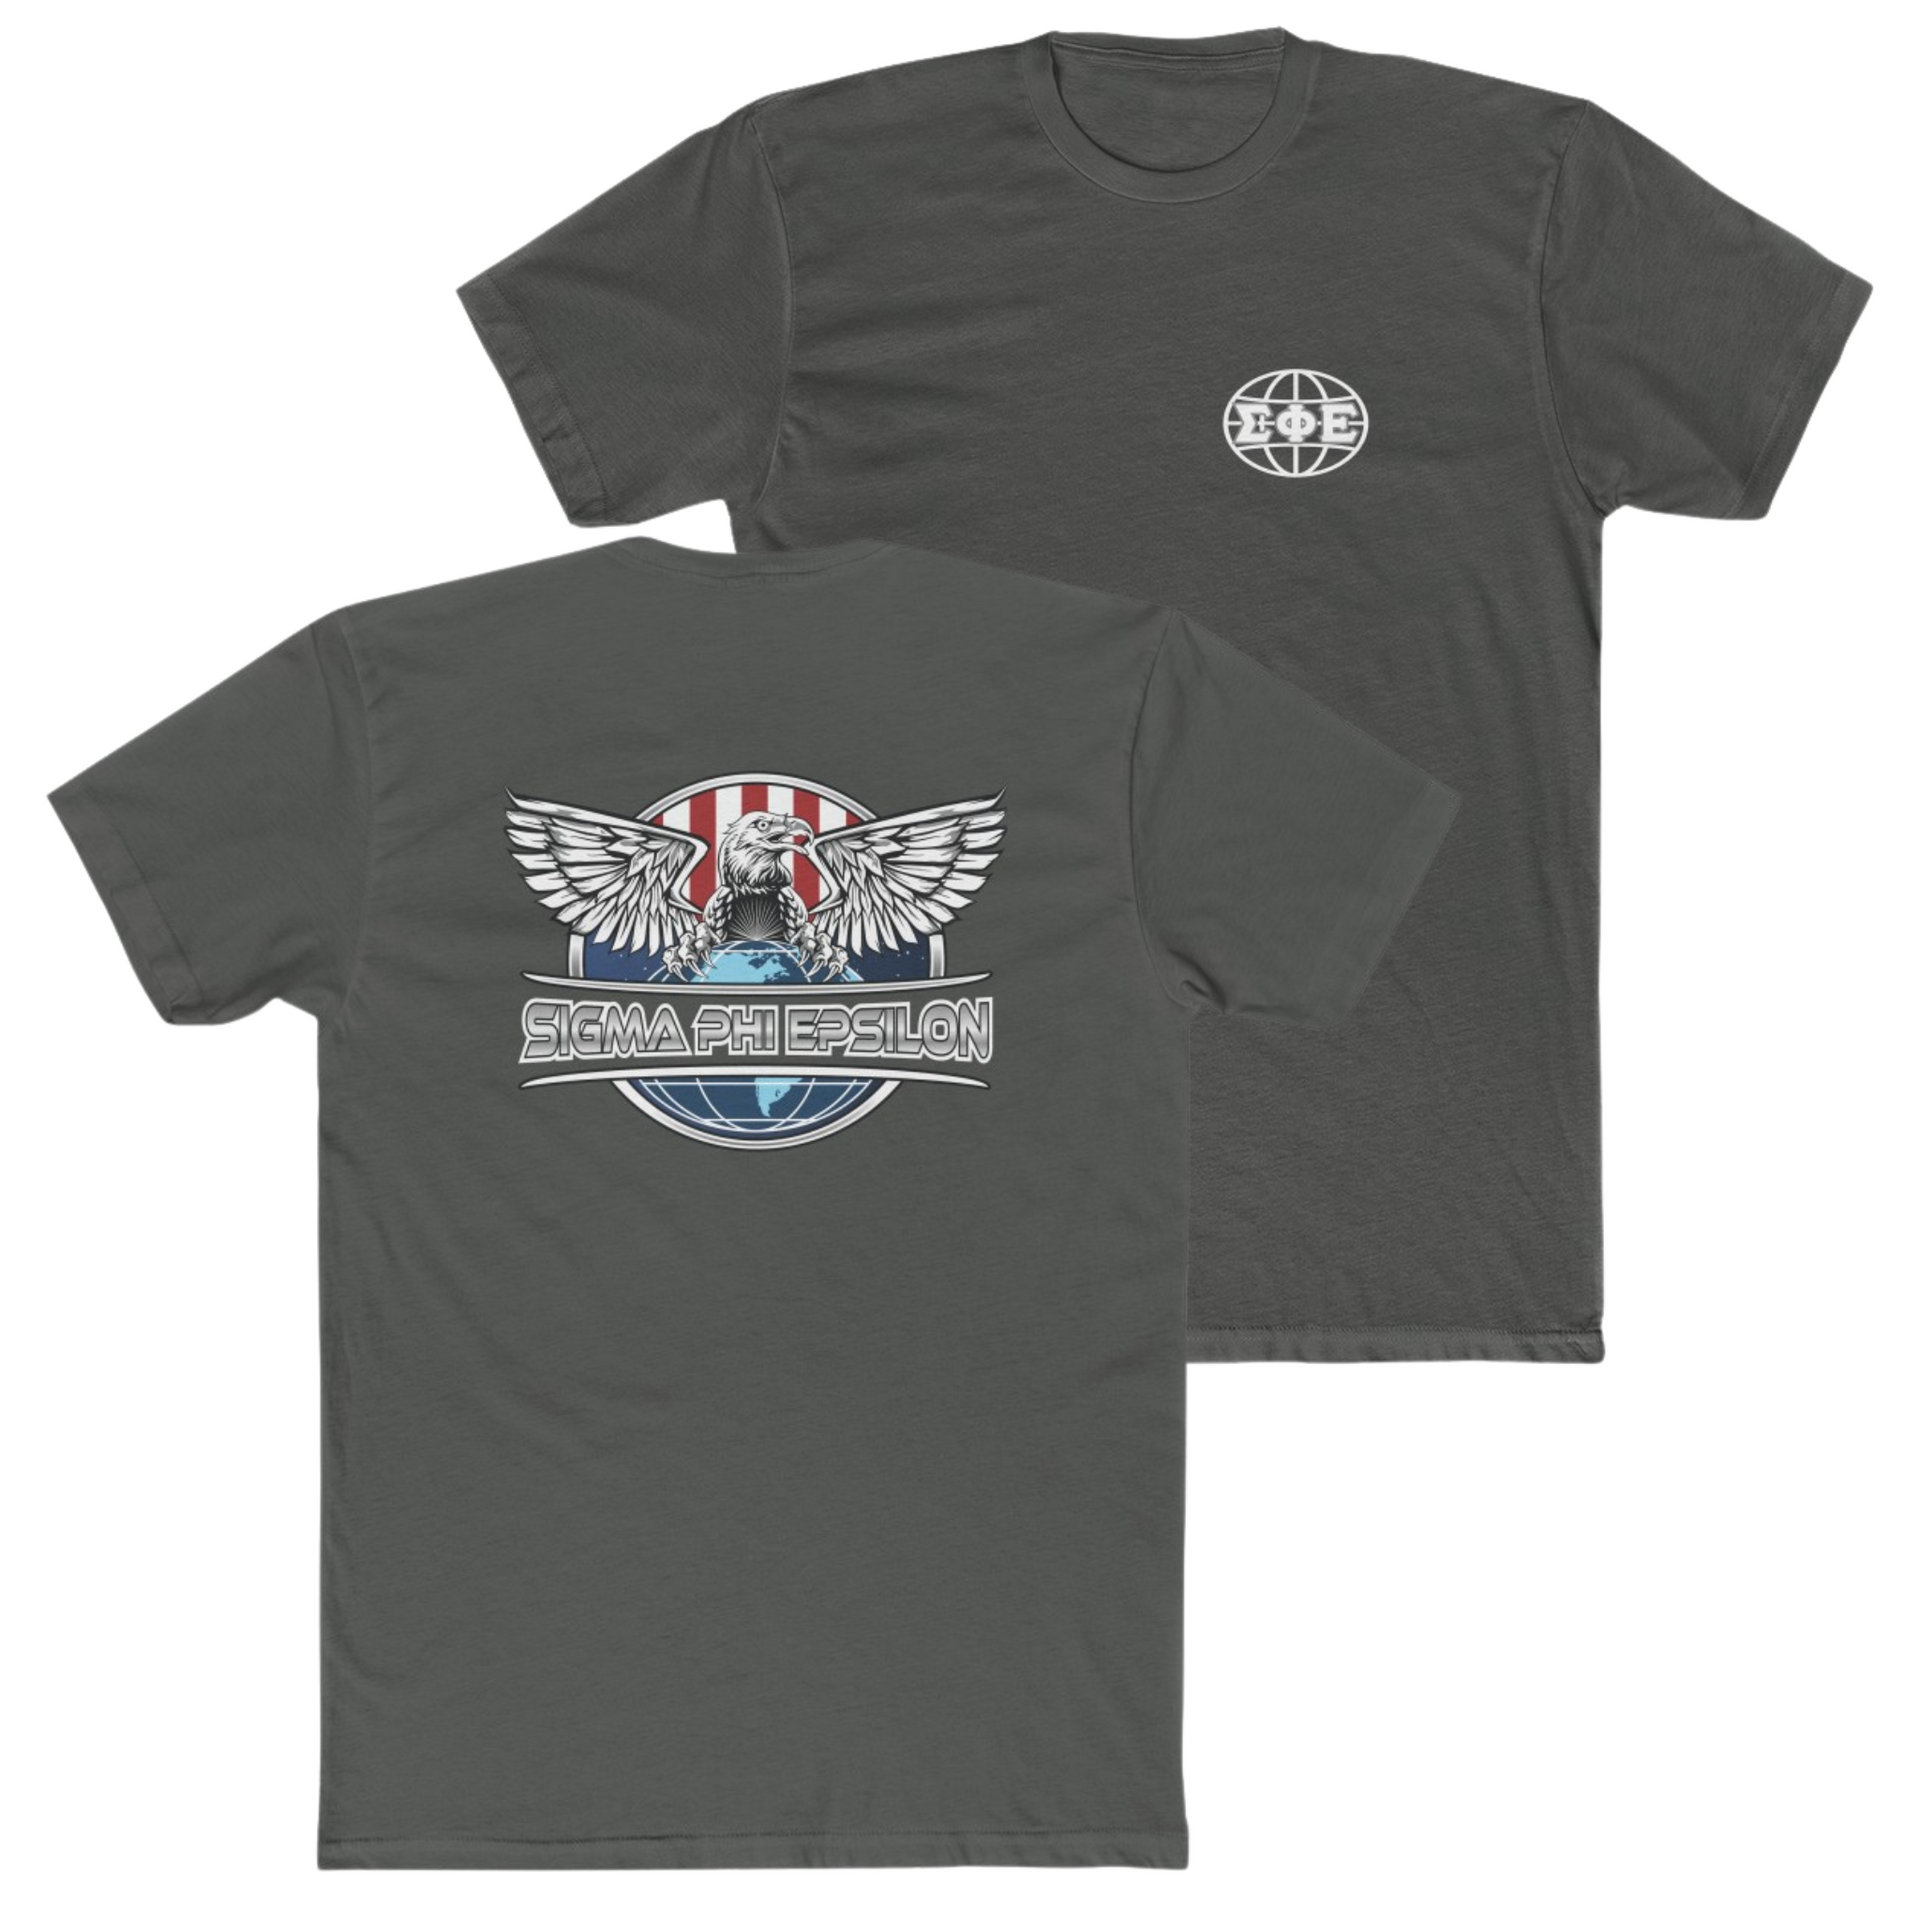 Grey Sigma Phi Epsilon Graphic T-Shirt | The Fraternal Order | SigEp Fraternity Clothes and Merchandise